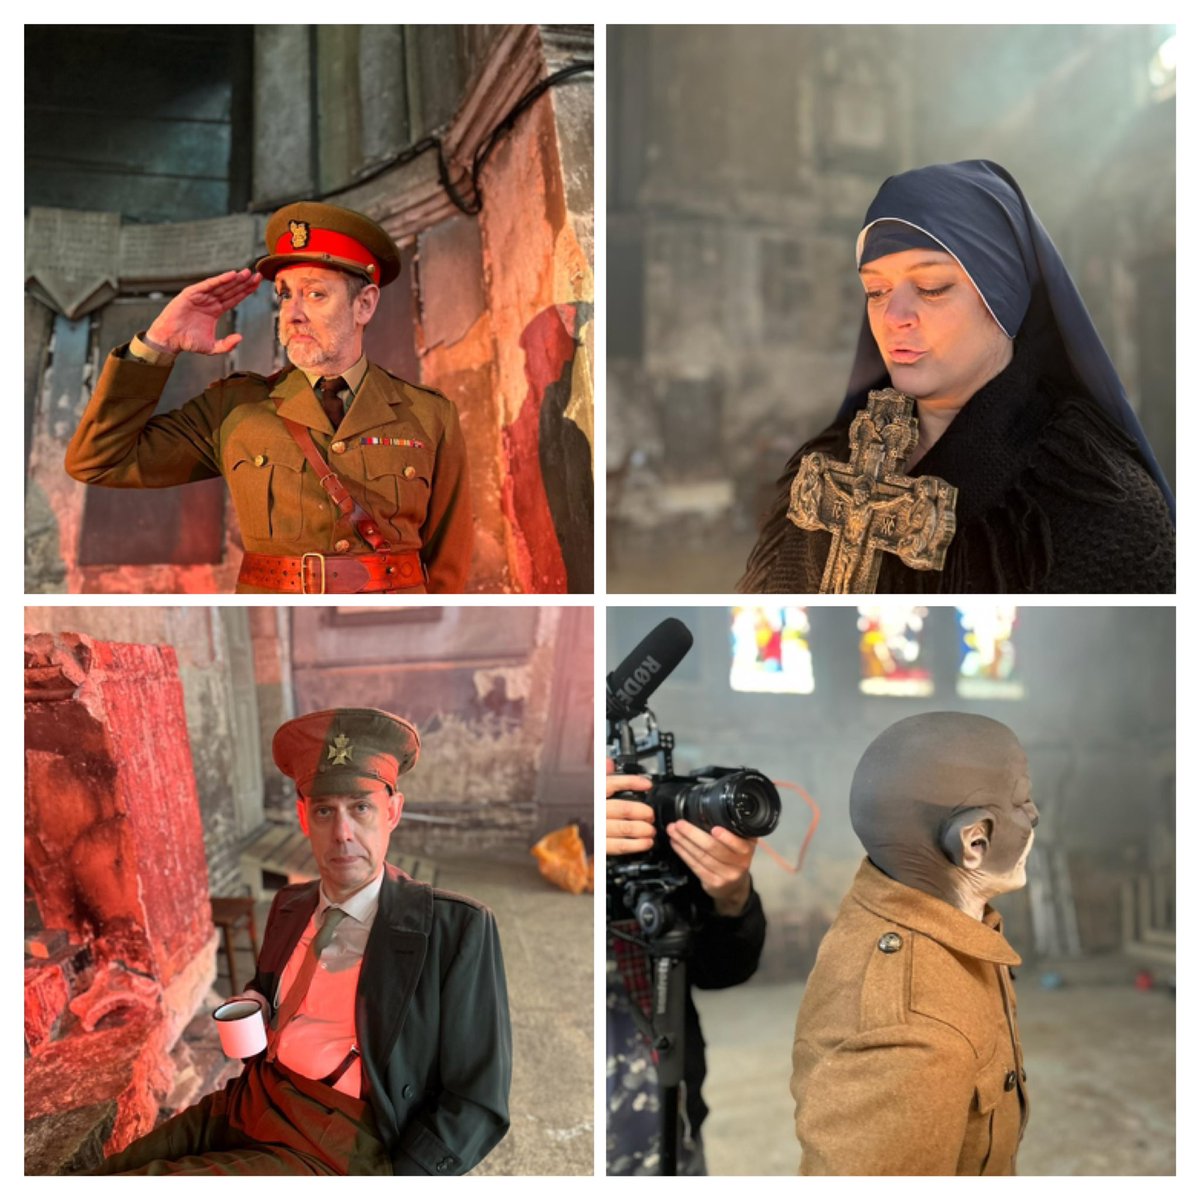 THE BEAST OF NO-MAN’S LAND has wrapped! 

We couldn’t have done this without such a fabulous cast & crew, including @kemalyildirim  @bellydancerlou @CyHenty @FaustiFilms & Michaela ❤️

#filmmaking #britishfilm #fokelore #ww1 #firstworldwar #weird #uncanny